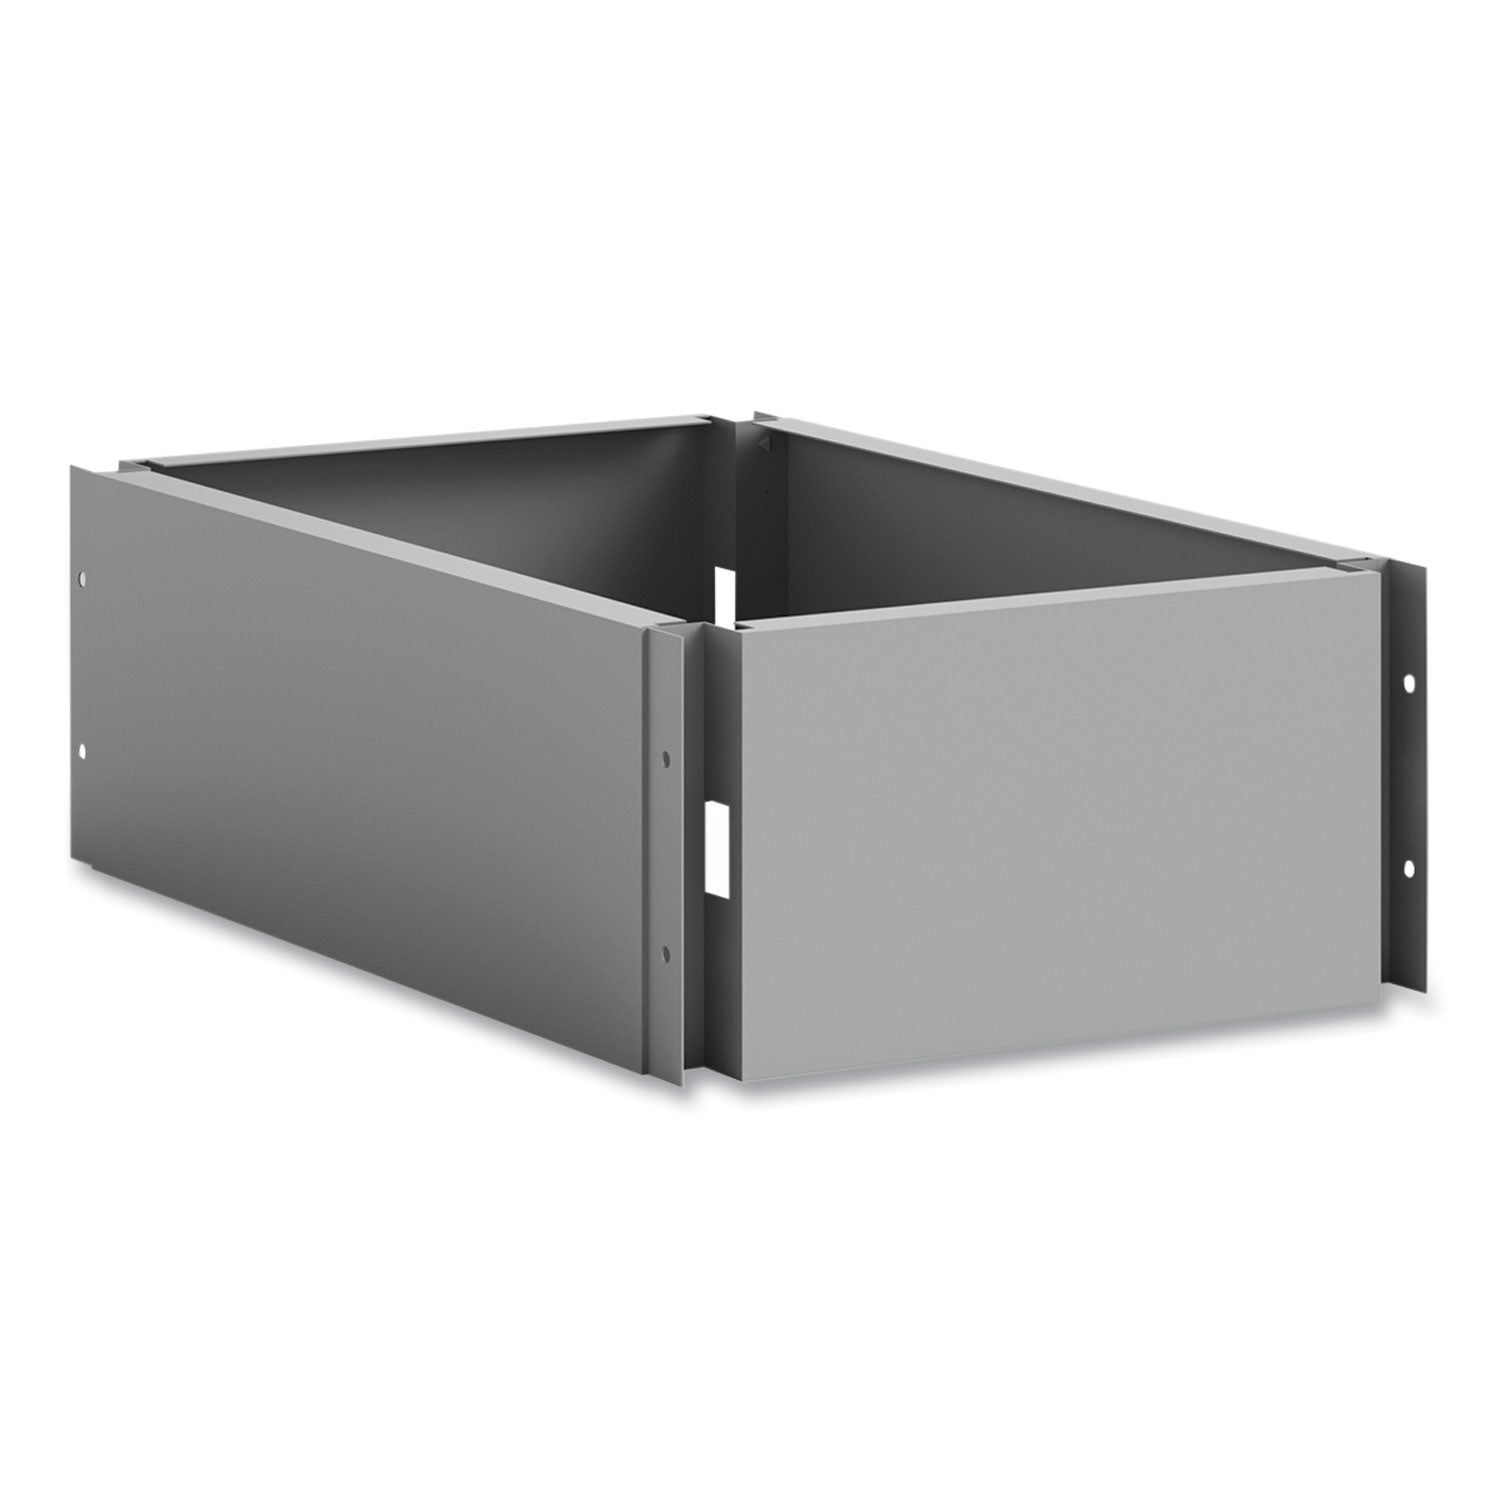 single-continuous-metal-locker-base-addition-117w-x-16d-x-575h-gray-ships-in-1-3-business-days_saf5519gr - 1